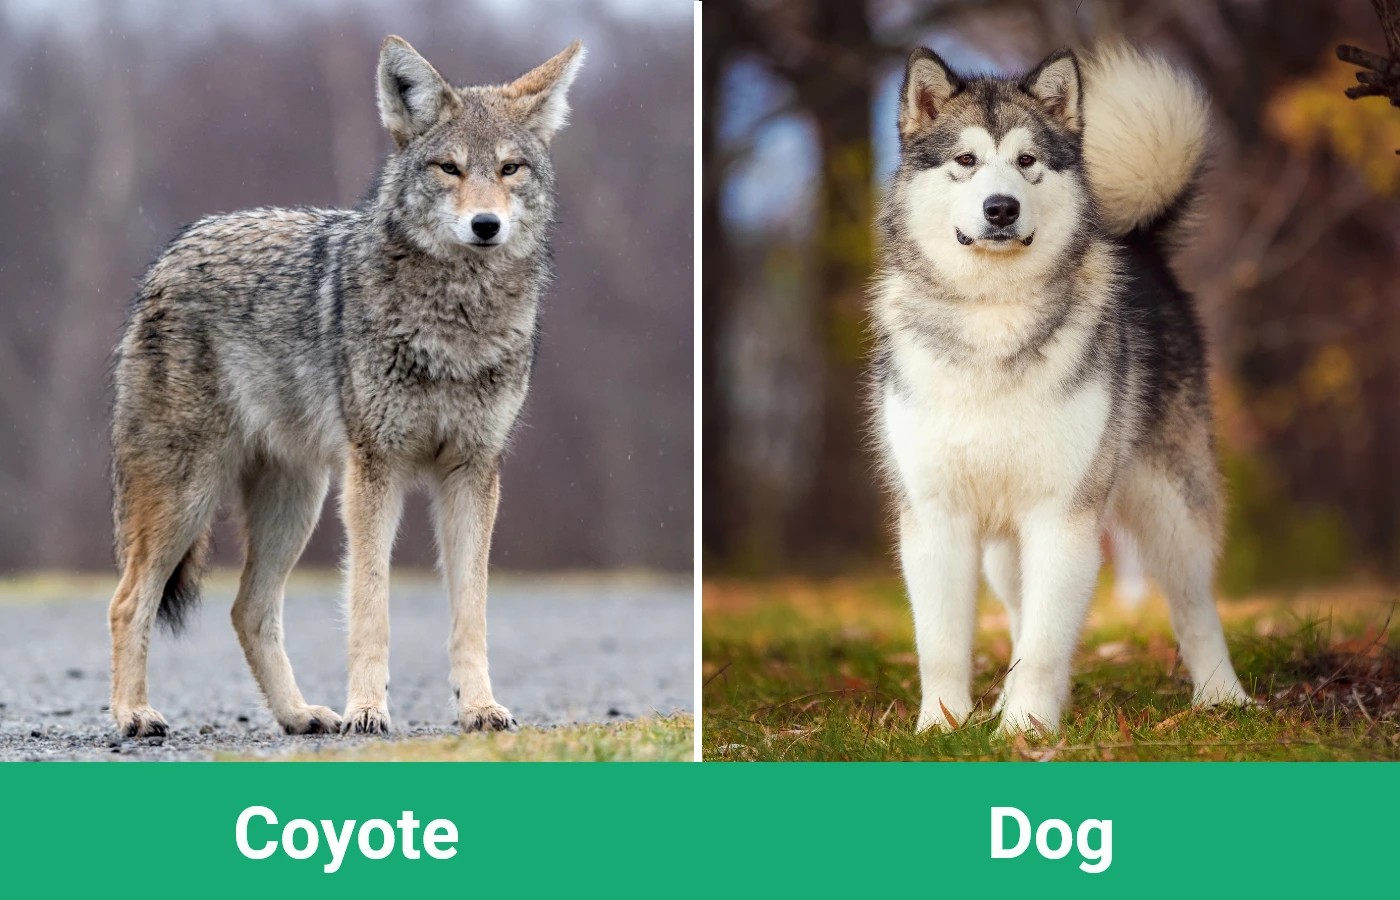 Coyote vs Dog - Visual Differences